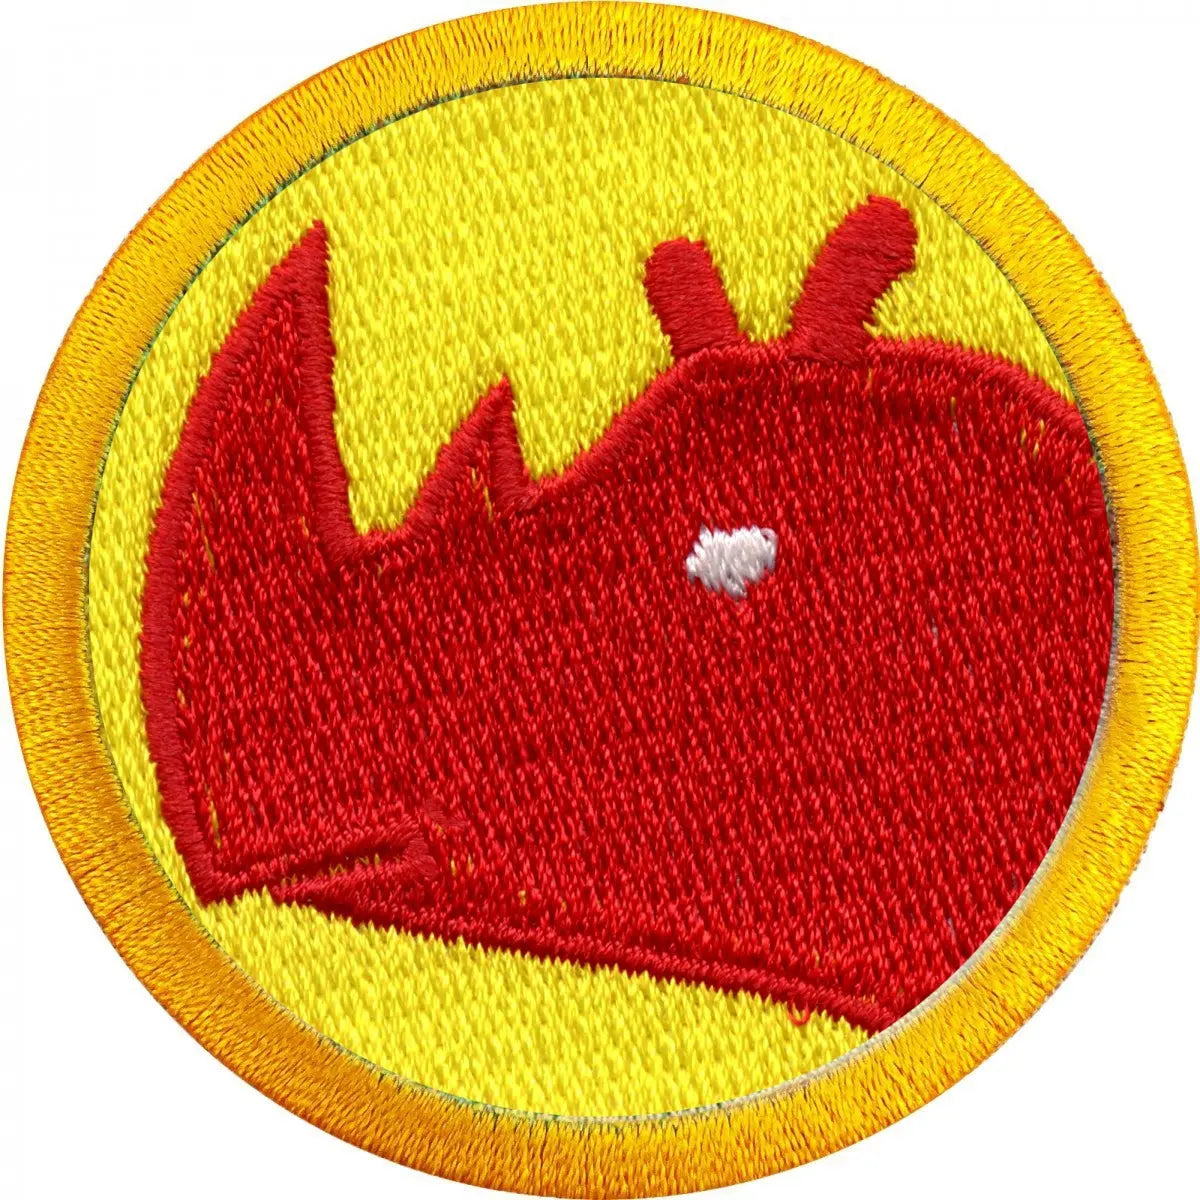 Rhino Sighting Scout Merit Badge Embroidered Iron-on Patch 